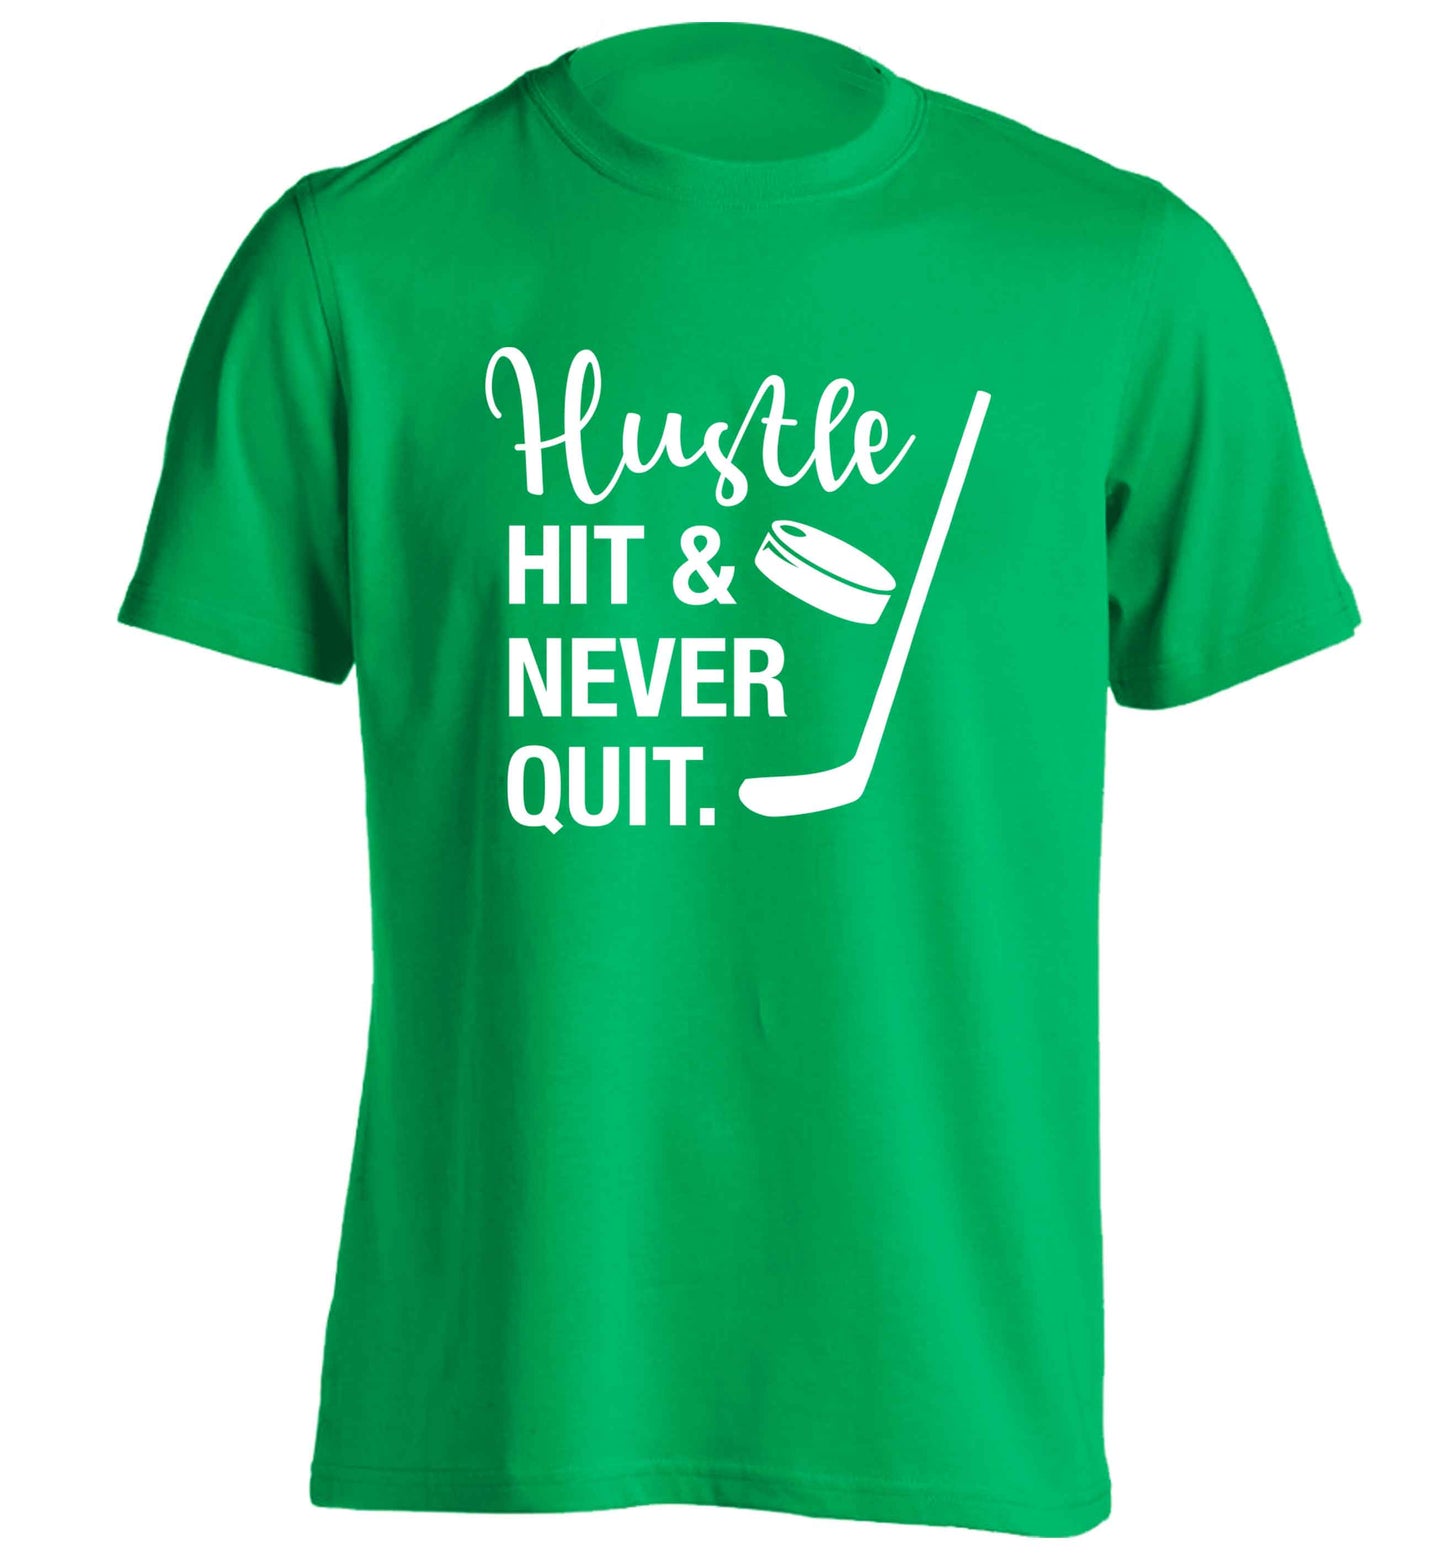 Hustle hit and never quit adults unisex green Tshirt 2XL